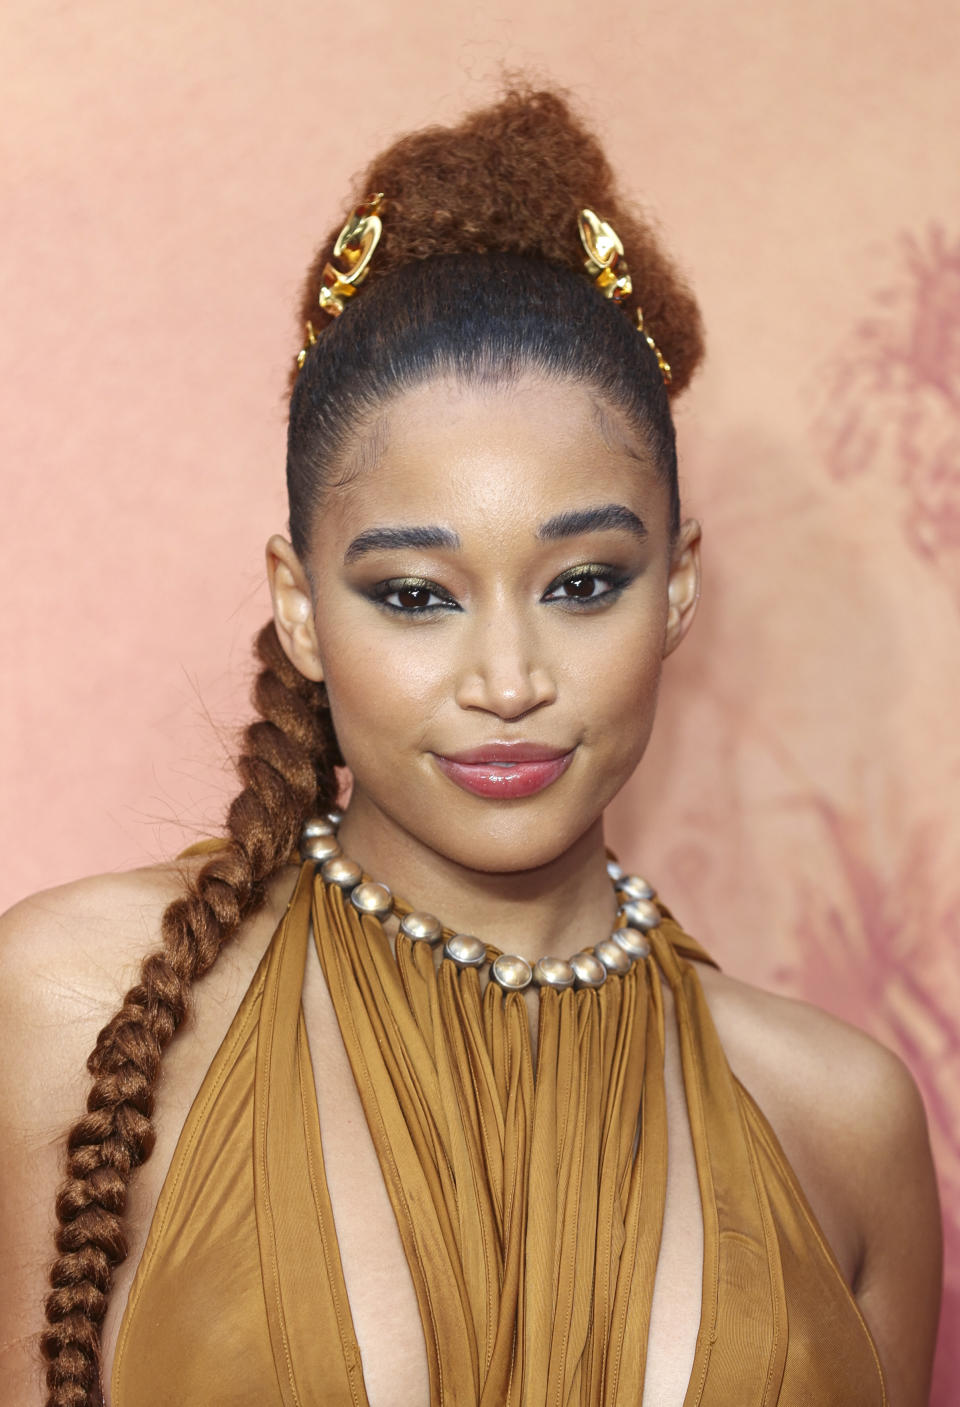 Amandla Stenberg poses with an intricate braided hairstyle and a halter-neck dress, featuring a necklace accent. She is attending an event